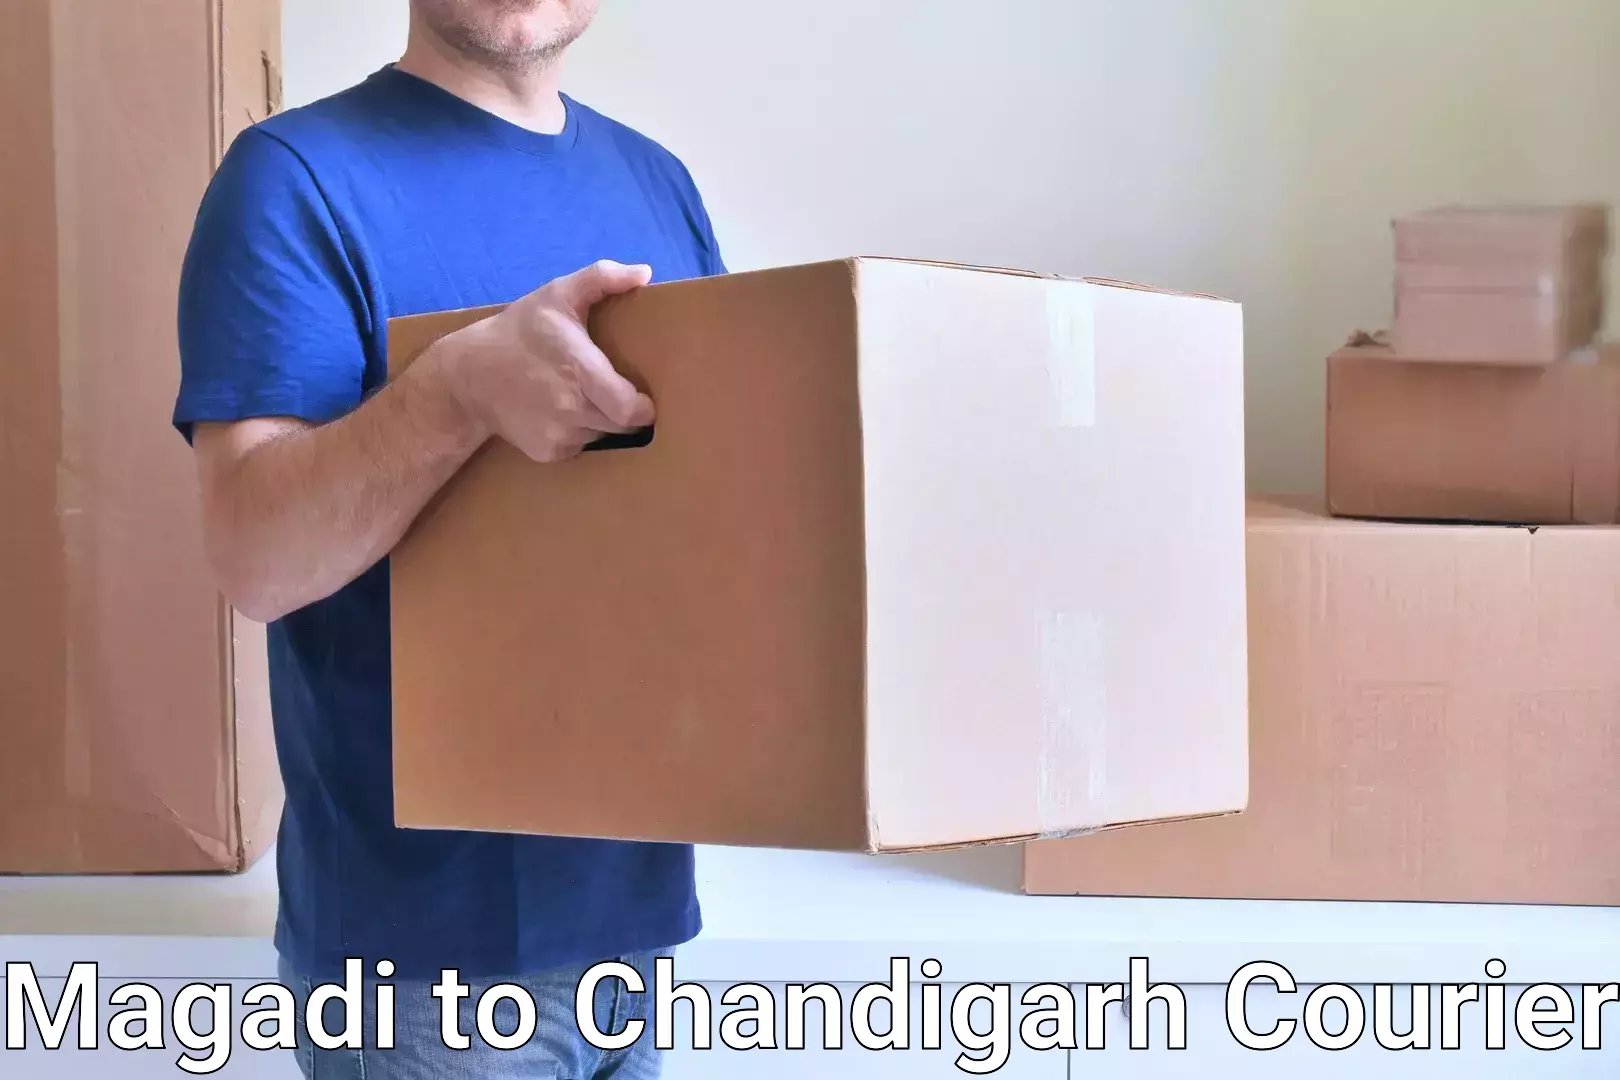 24/7 shipping services Magadi to Chandigarh